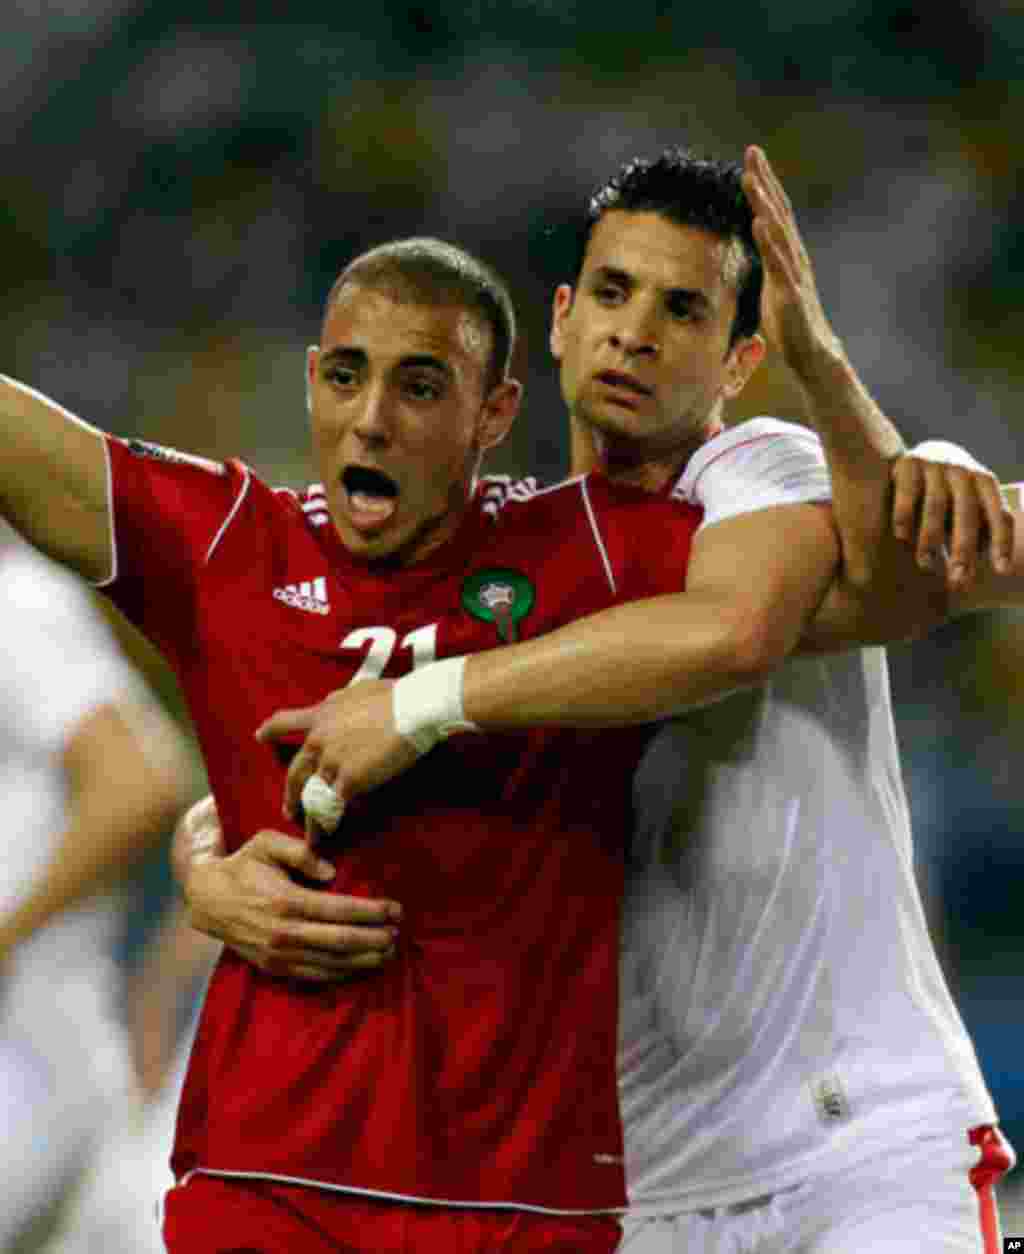 Morocco's Aissam appeals to the referee during their African Cup of Nations soccer match against Tunisia in Libreville